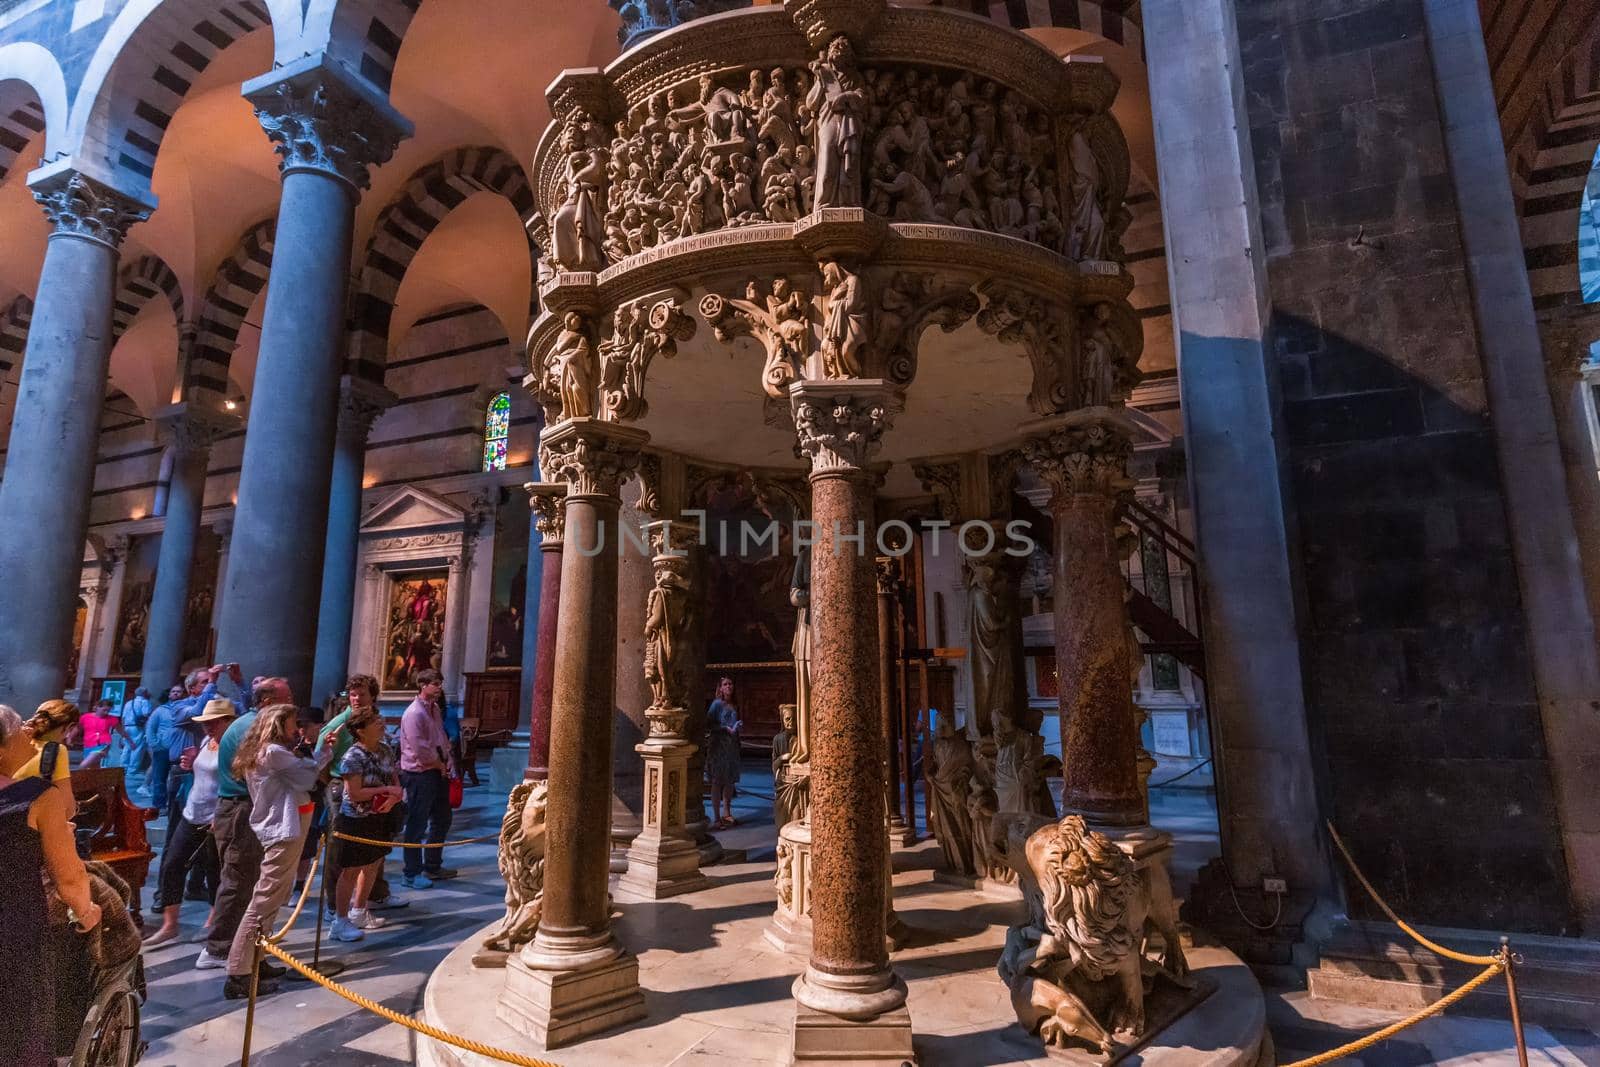 PISA, ITALY, JUNE 06, 2016 : interiors and architectural details of Pisa cathedral, june 06, 2016 in Pisa, Italy